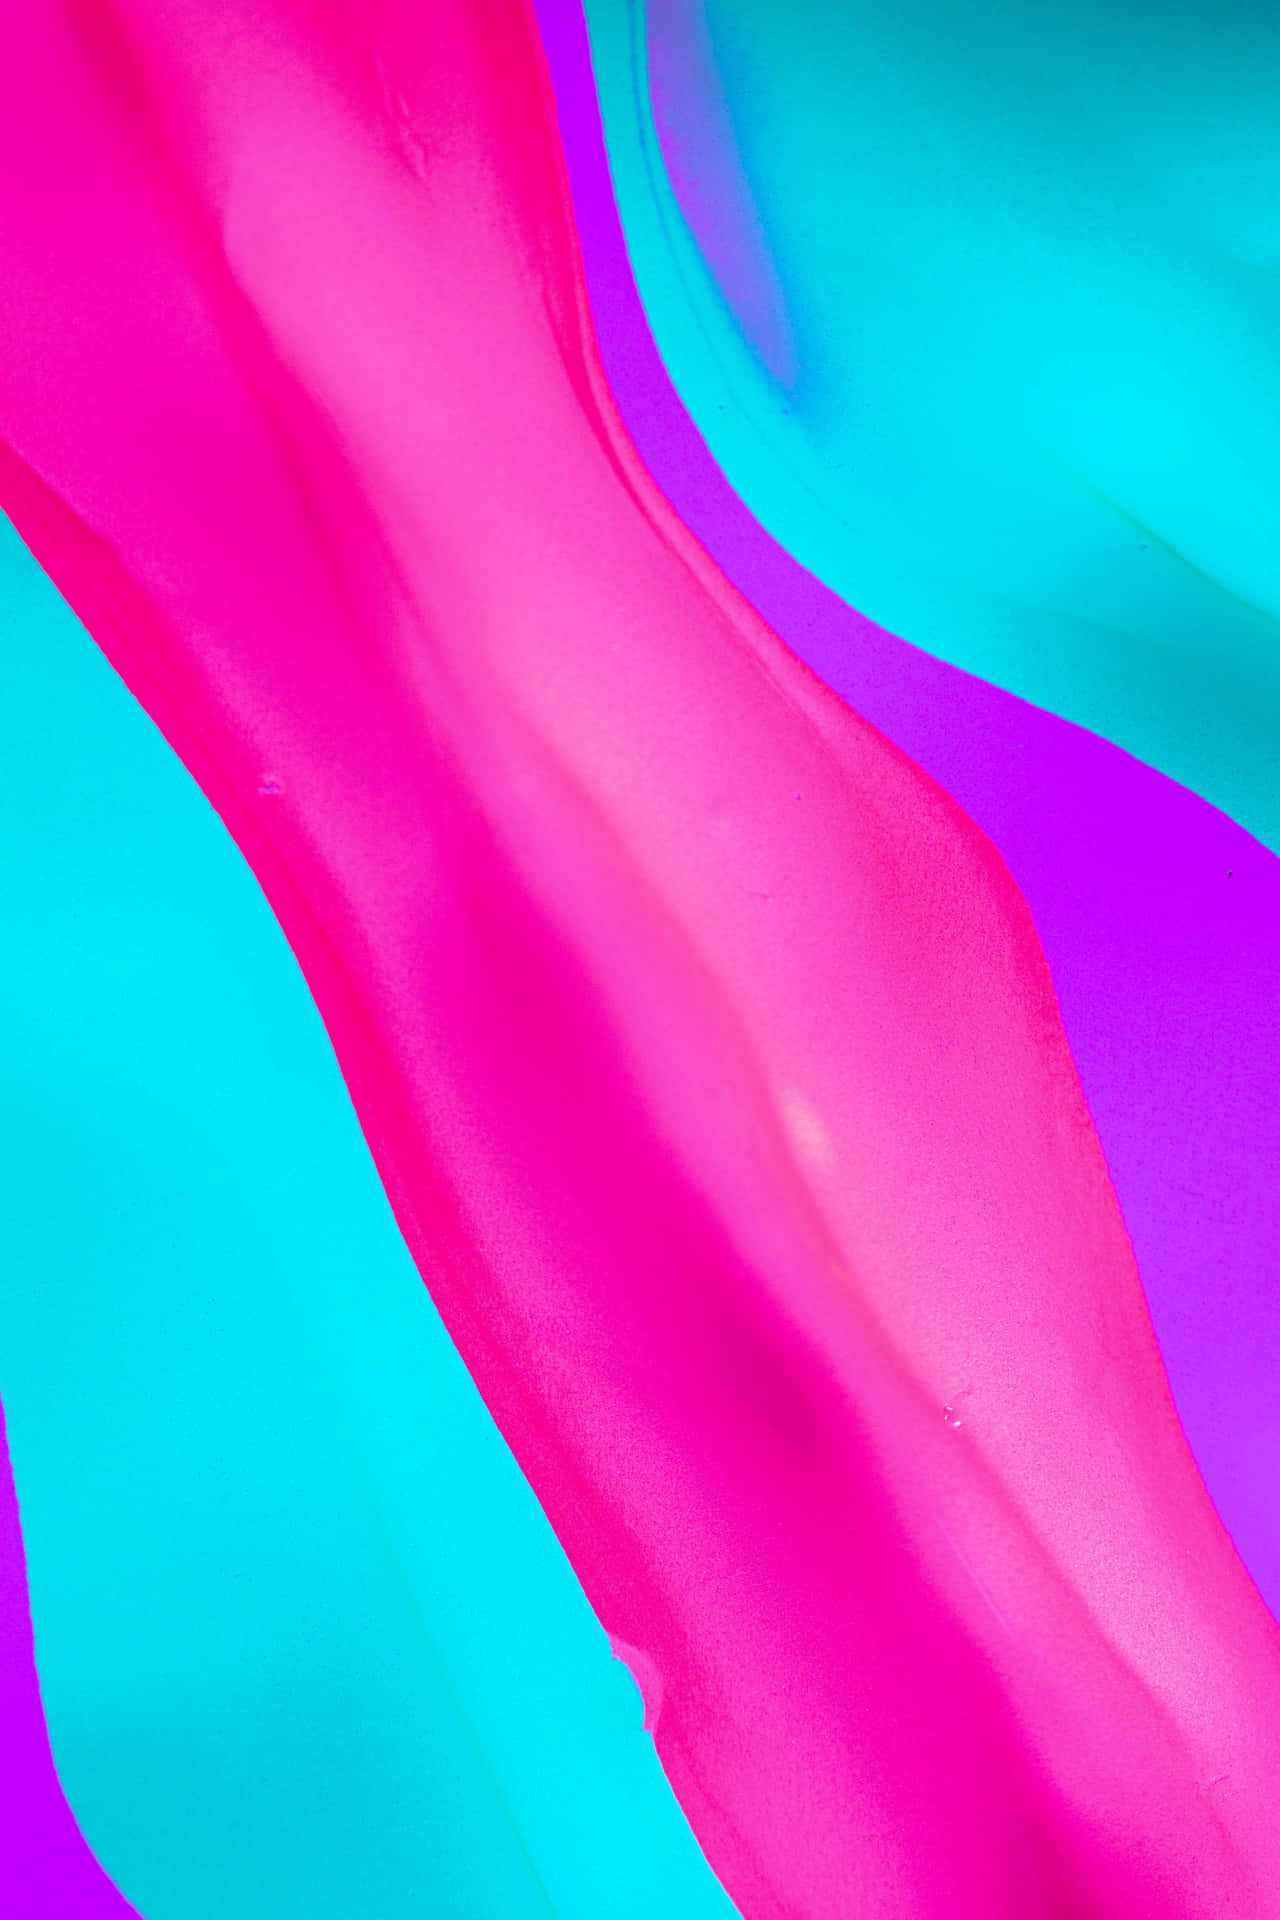 A Pink And Blue Liquid